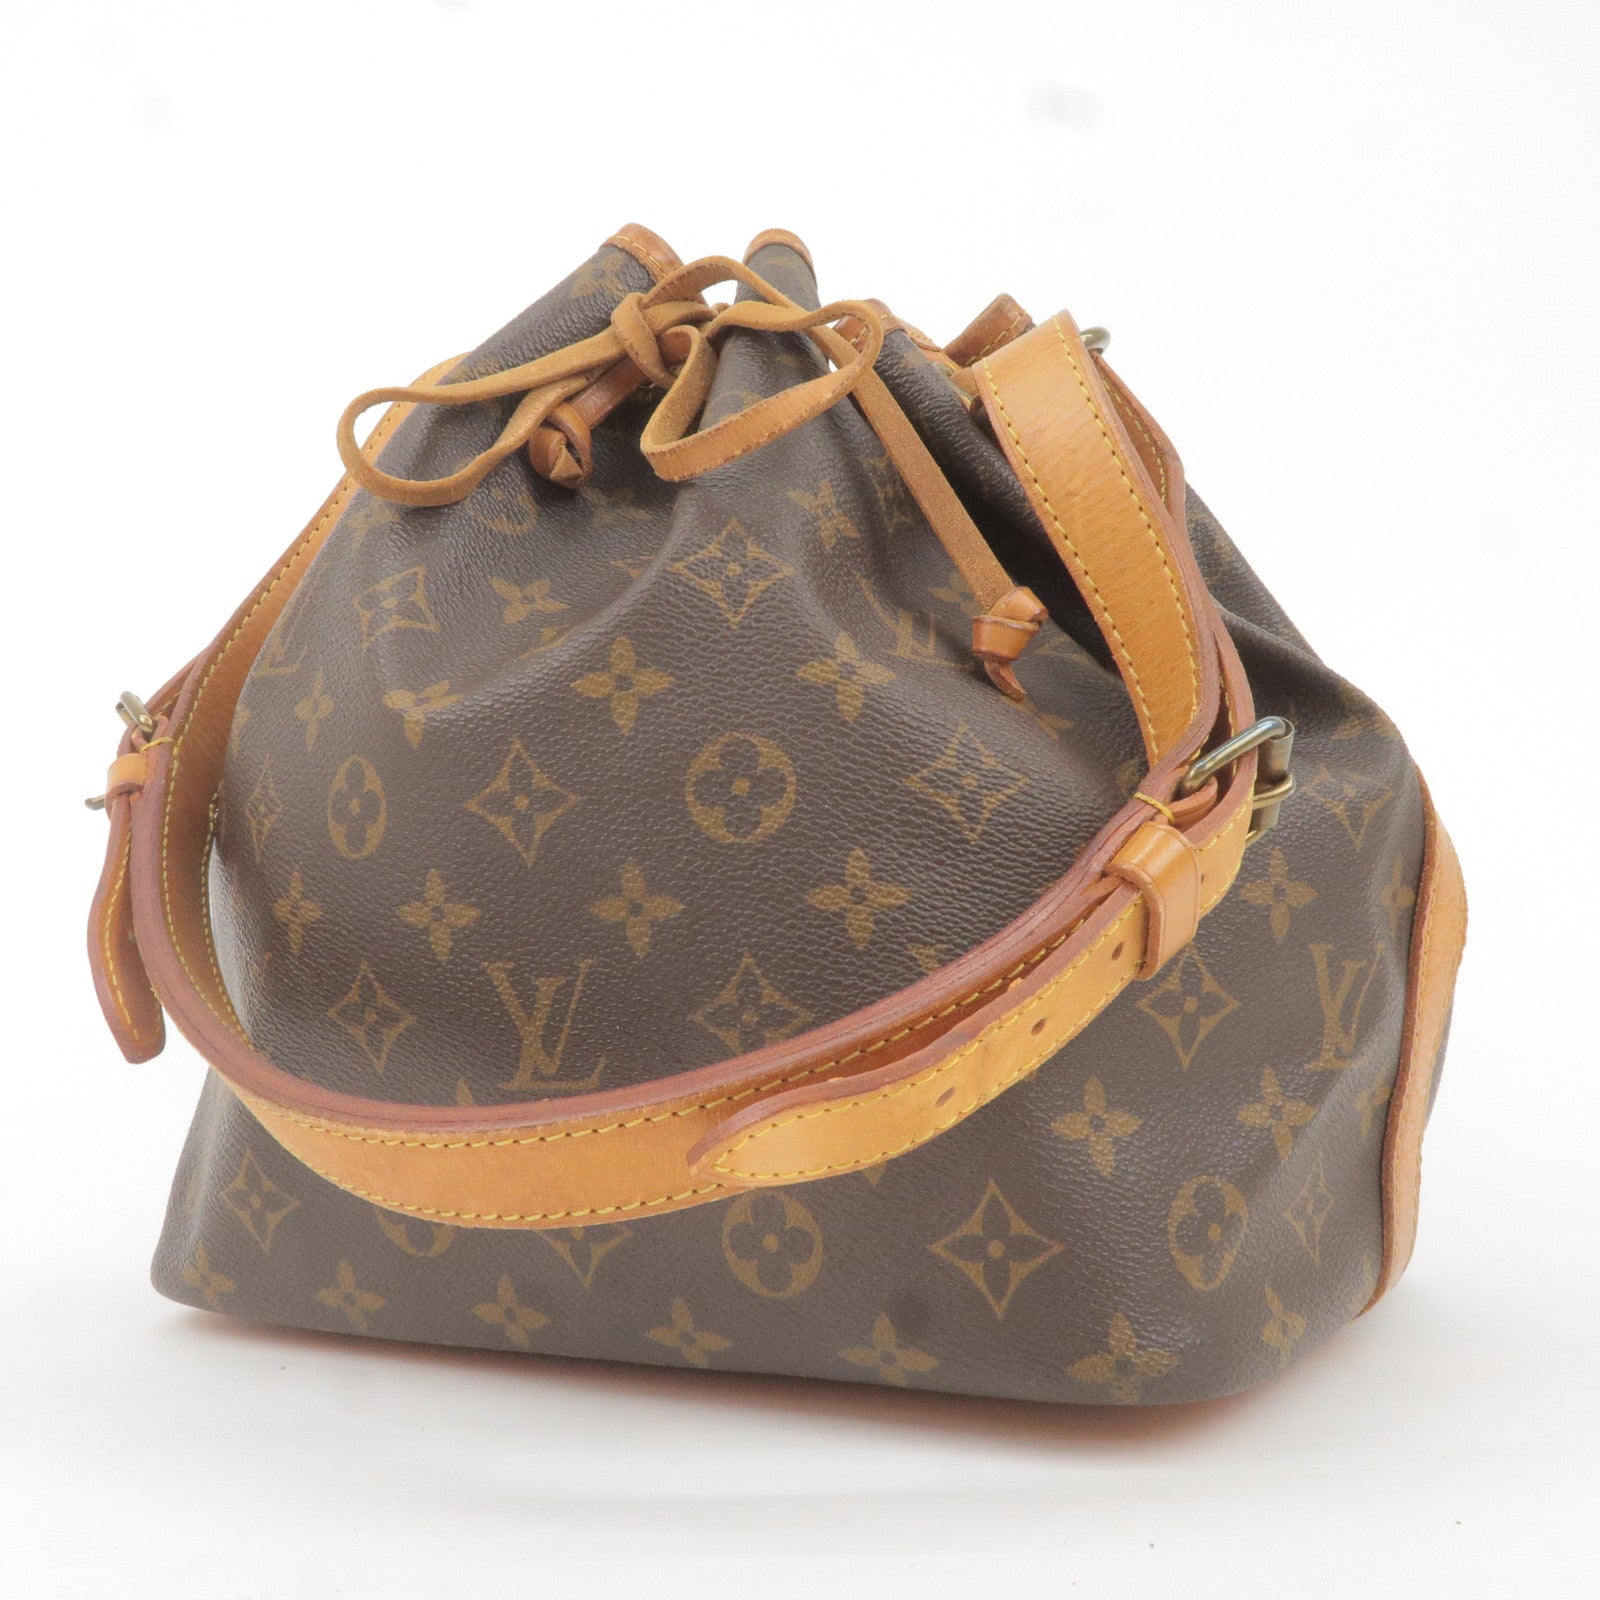 Louis Vuitton Gobelins Brown Leather Backpack Bag (Pre-Owned)